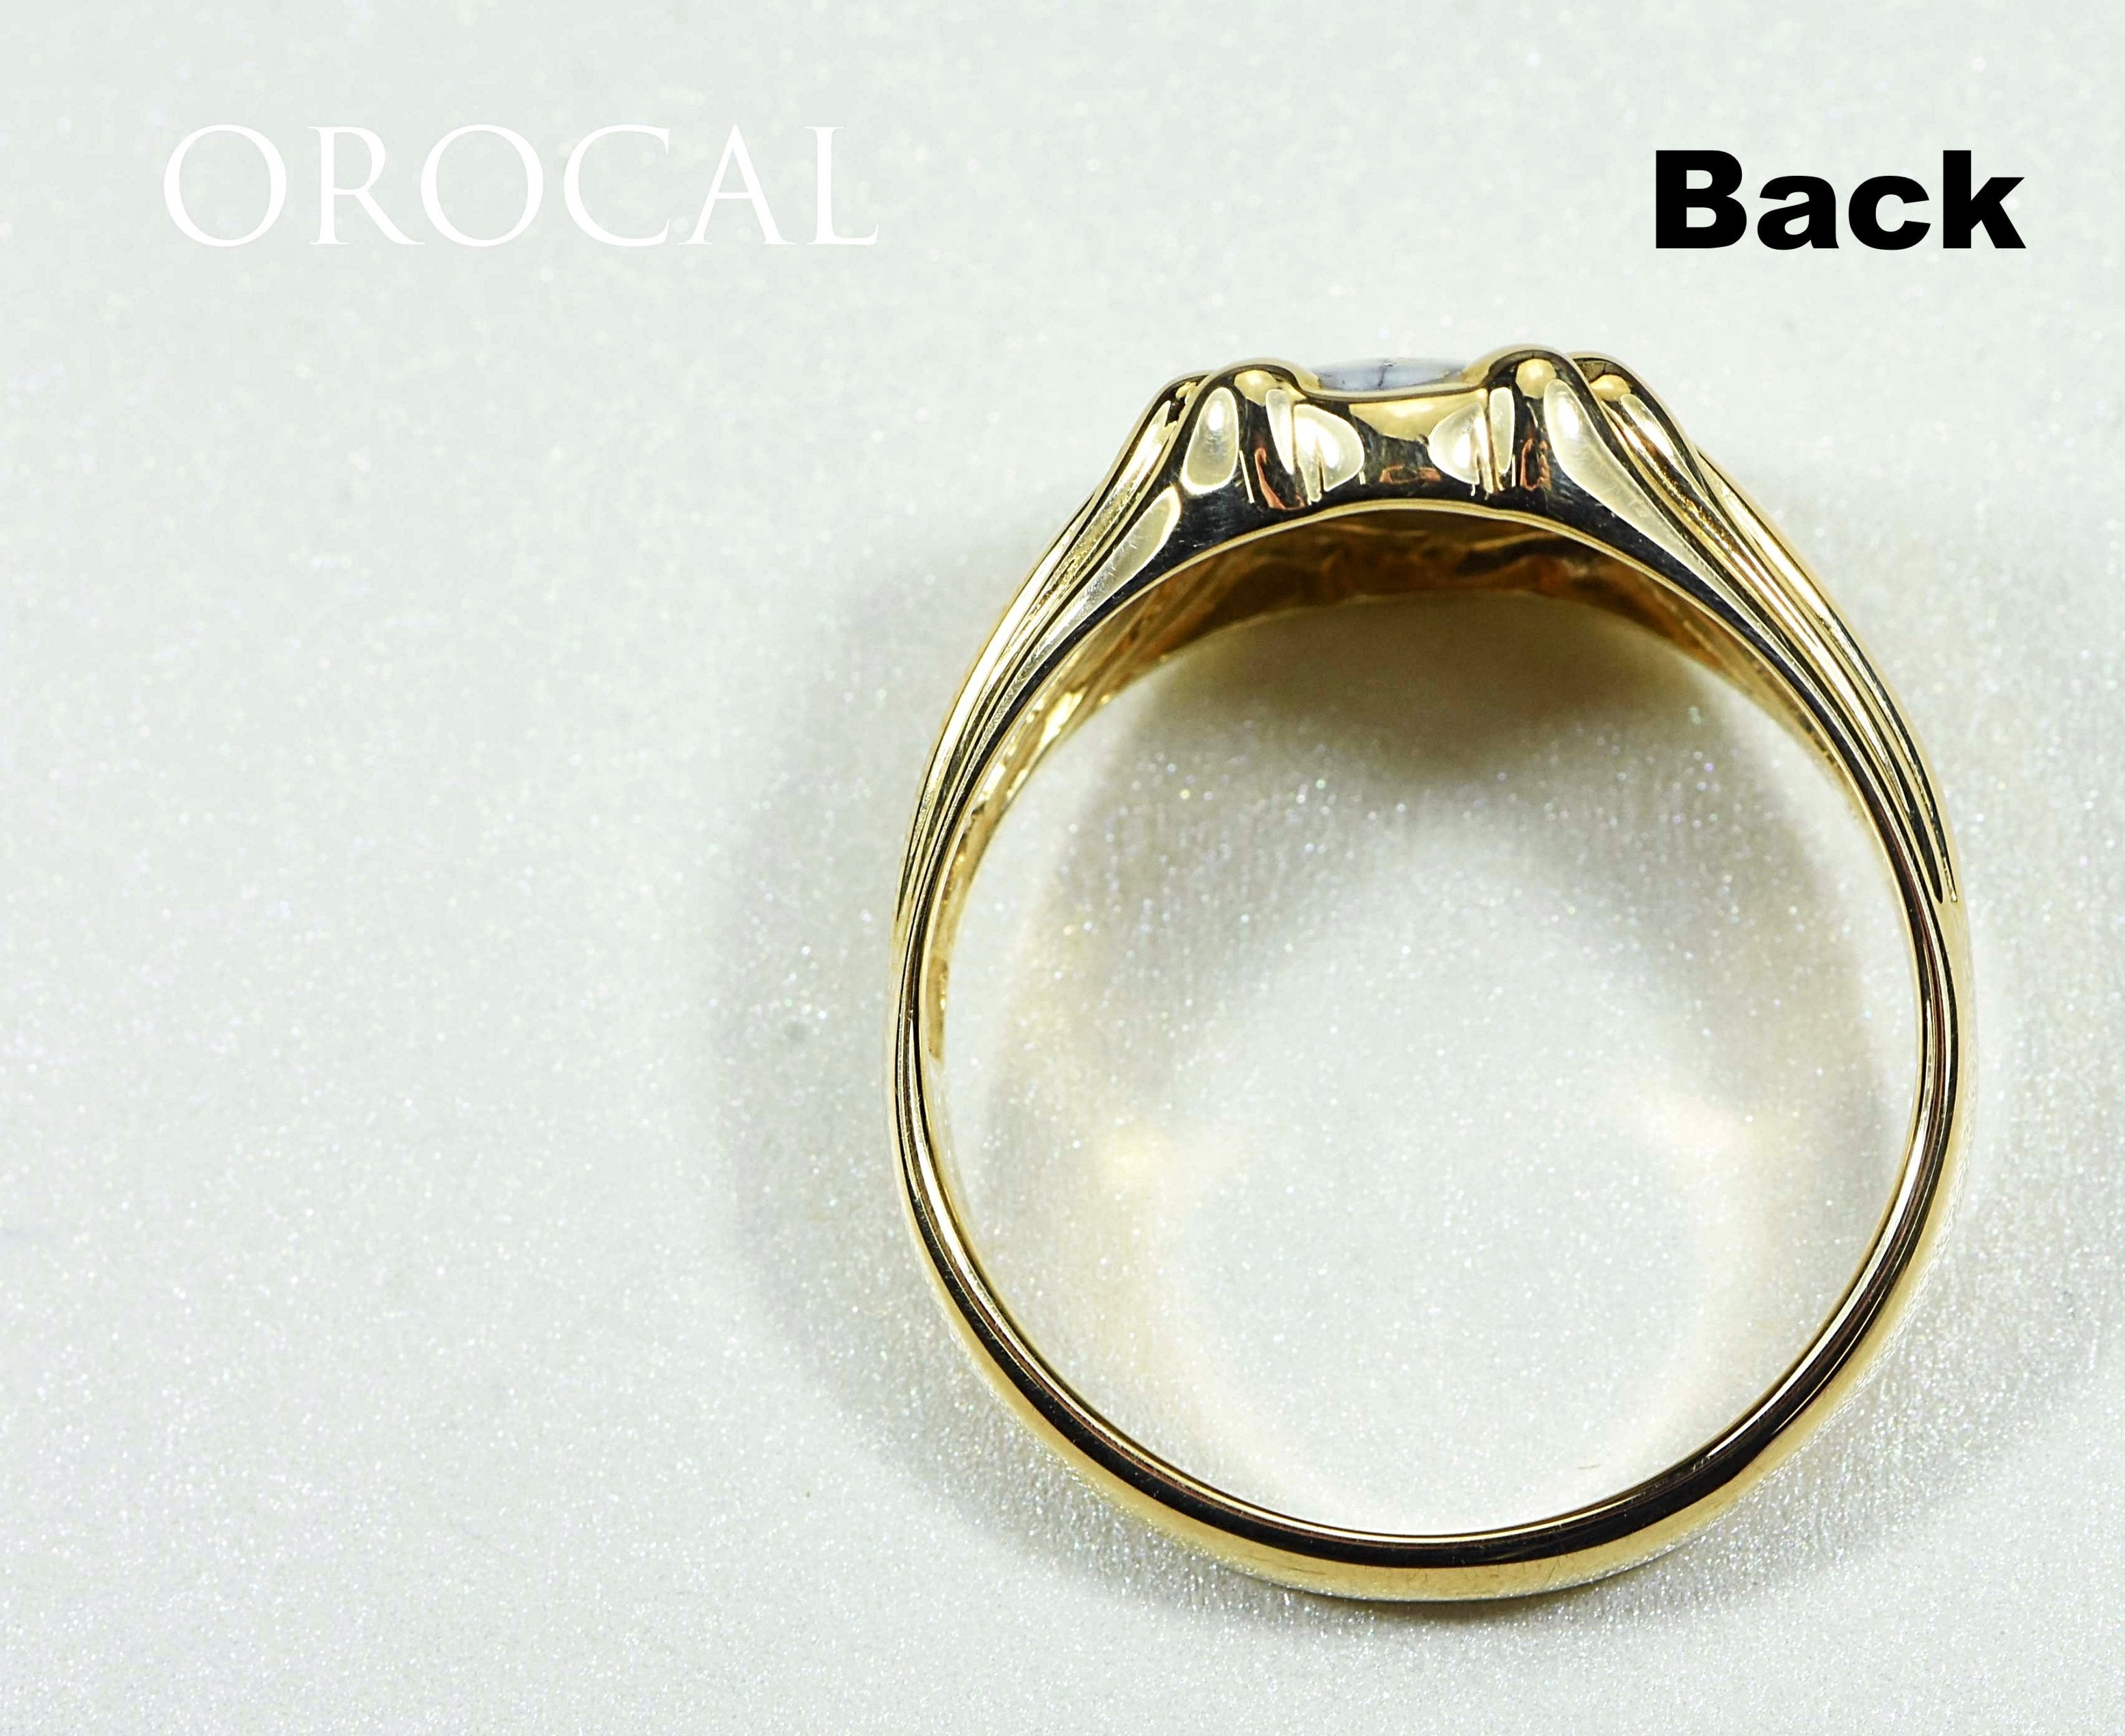 Gold Quartz Ring "Orocal" RM791Q Genuine Hand Crafted Jewelry - 14K Gold Casting